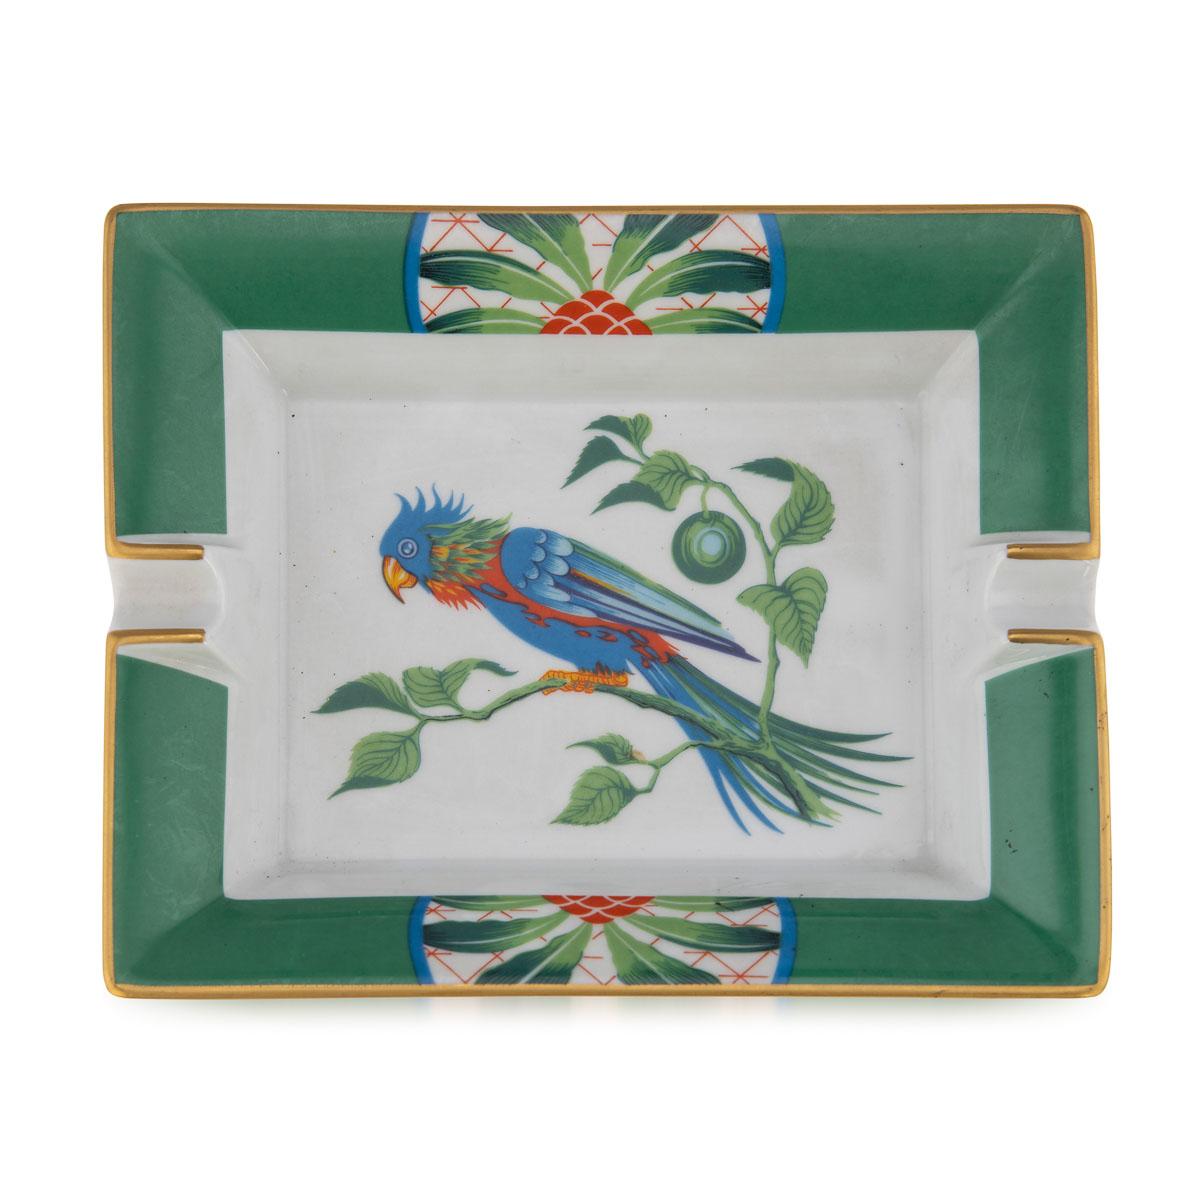 A ceramic ashtray by Hermes, made in France in the latter half of the 20th century. These ashtrays have always been very collectable with the vintage models in particular. This one has a lovely bird theme but at the same time typically Hermes; a